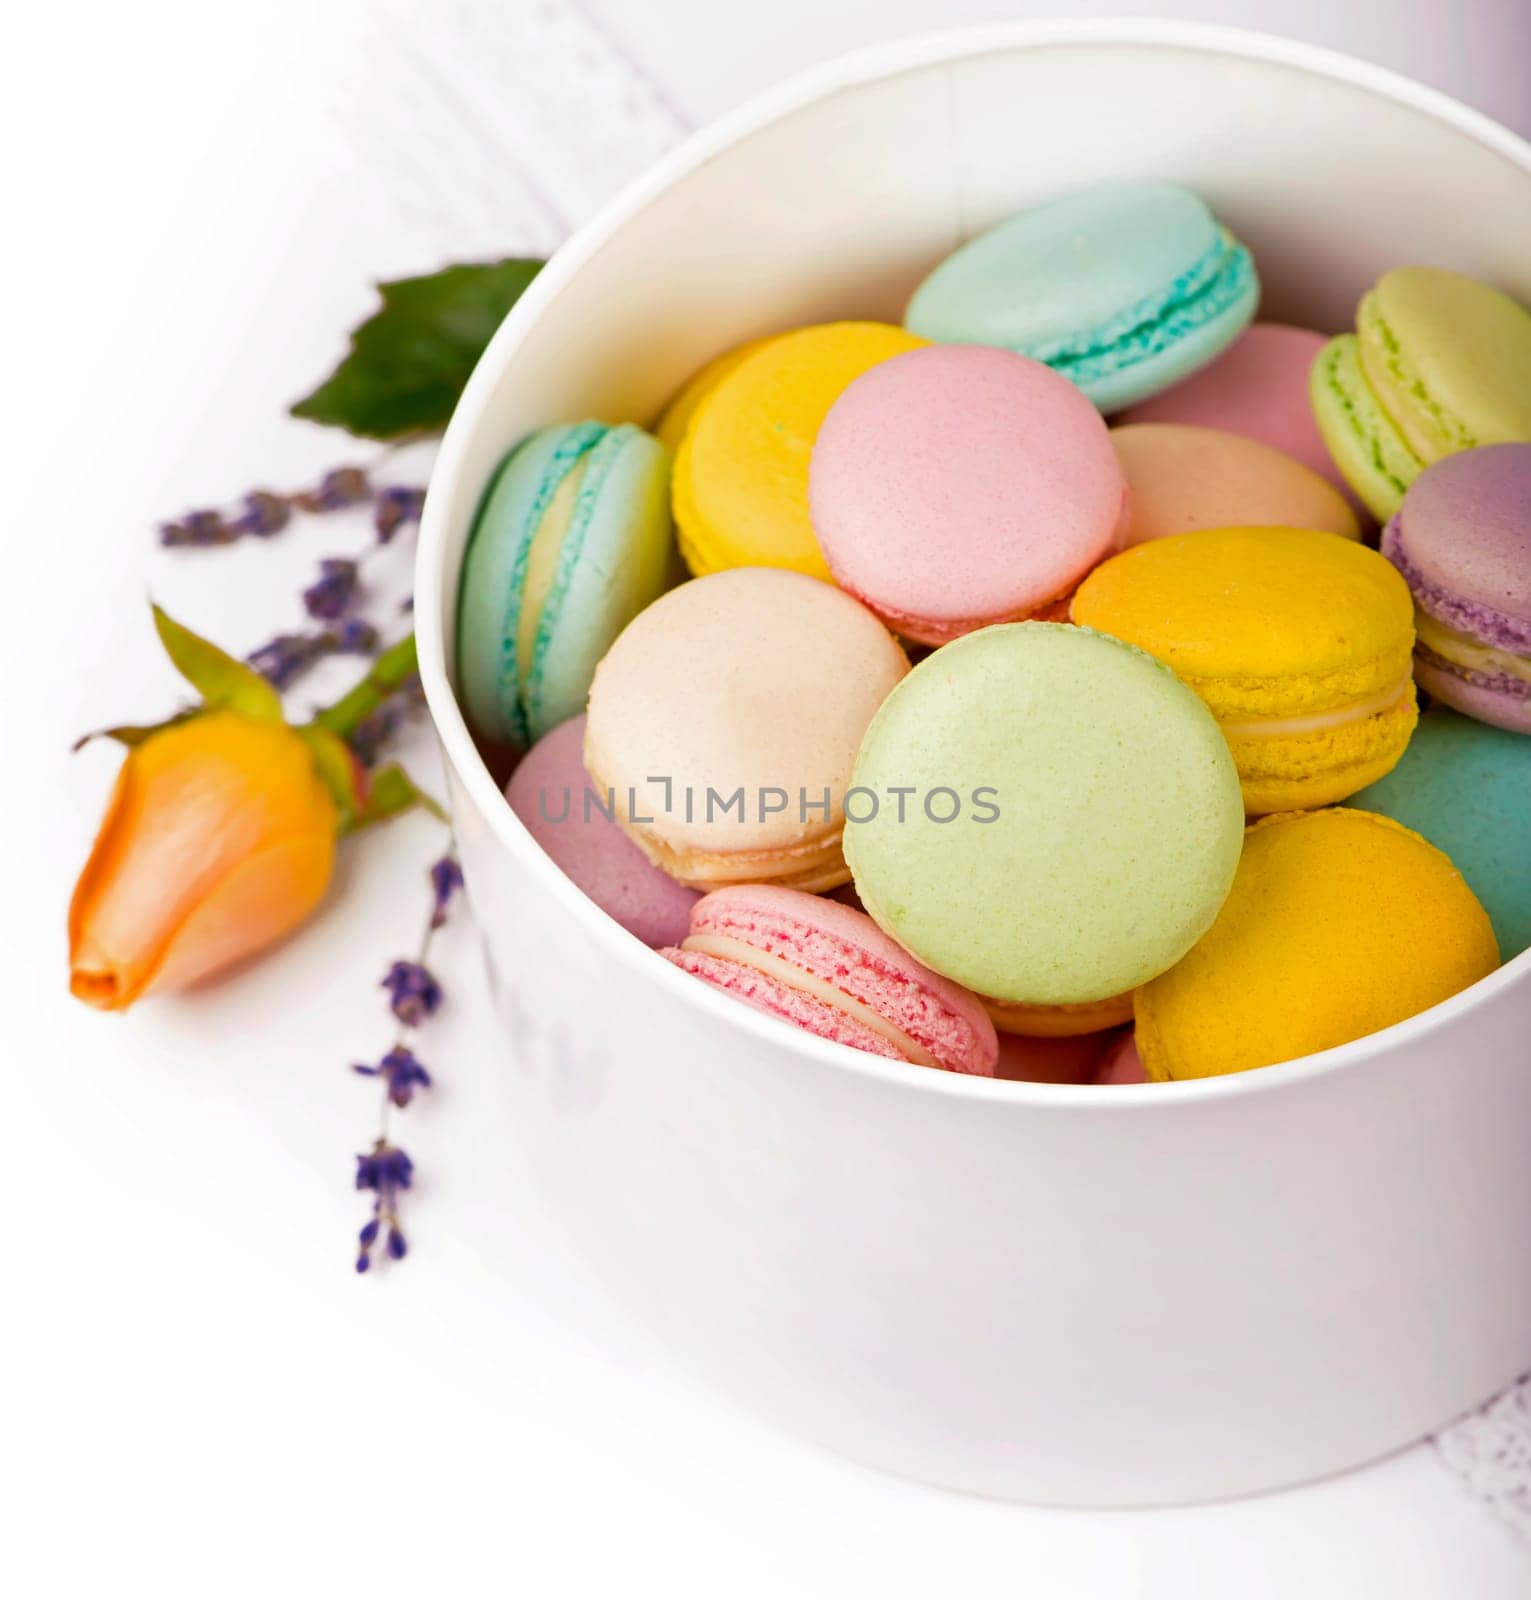 Many delicious colorful macarons in box on white background by aprilphoto